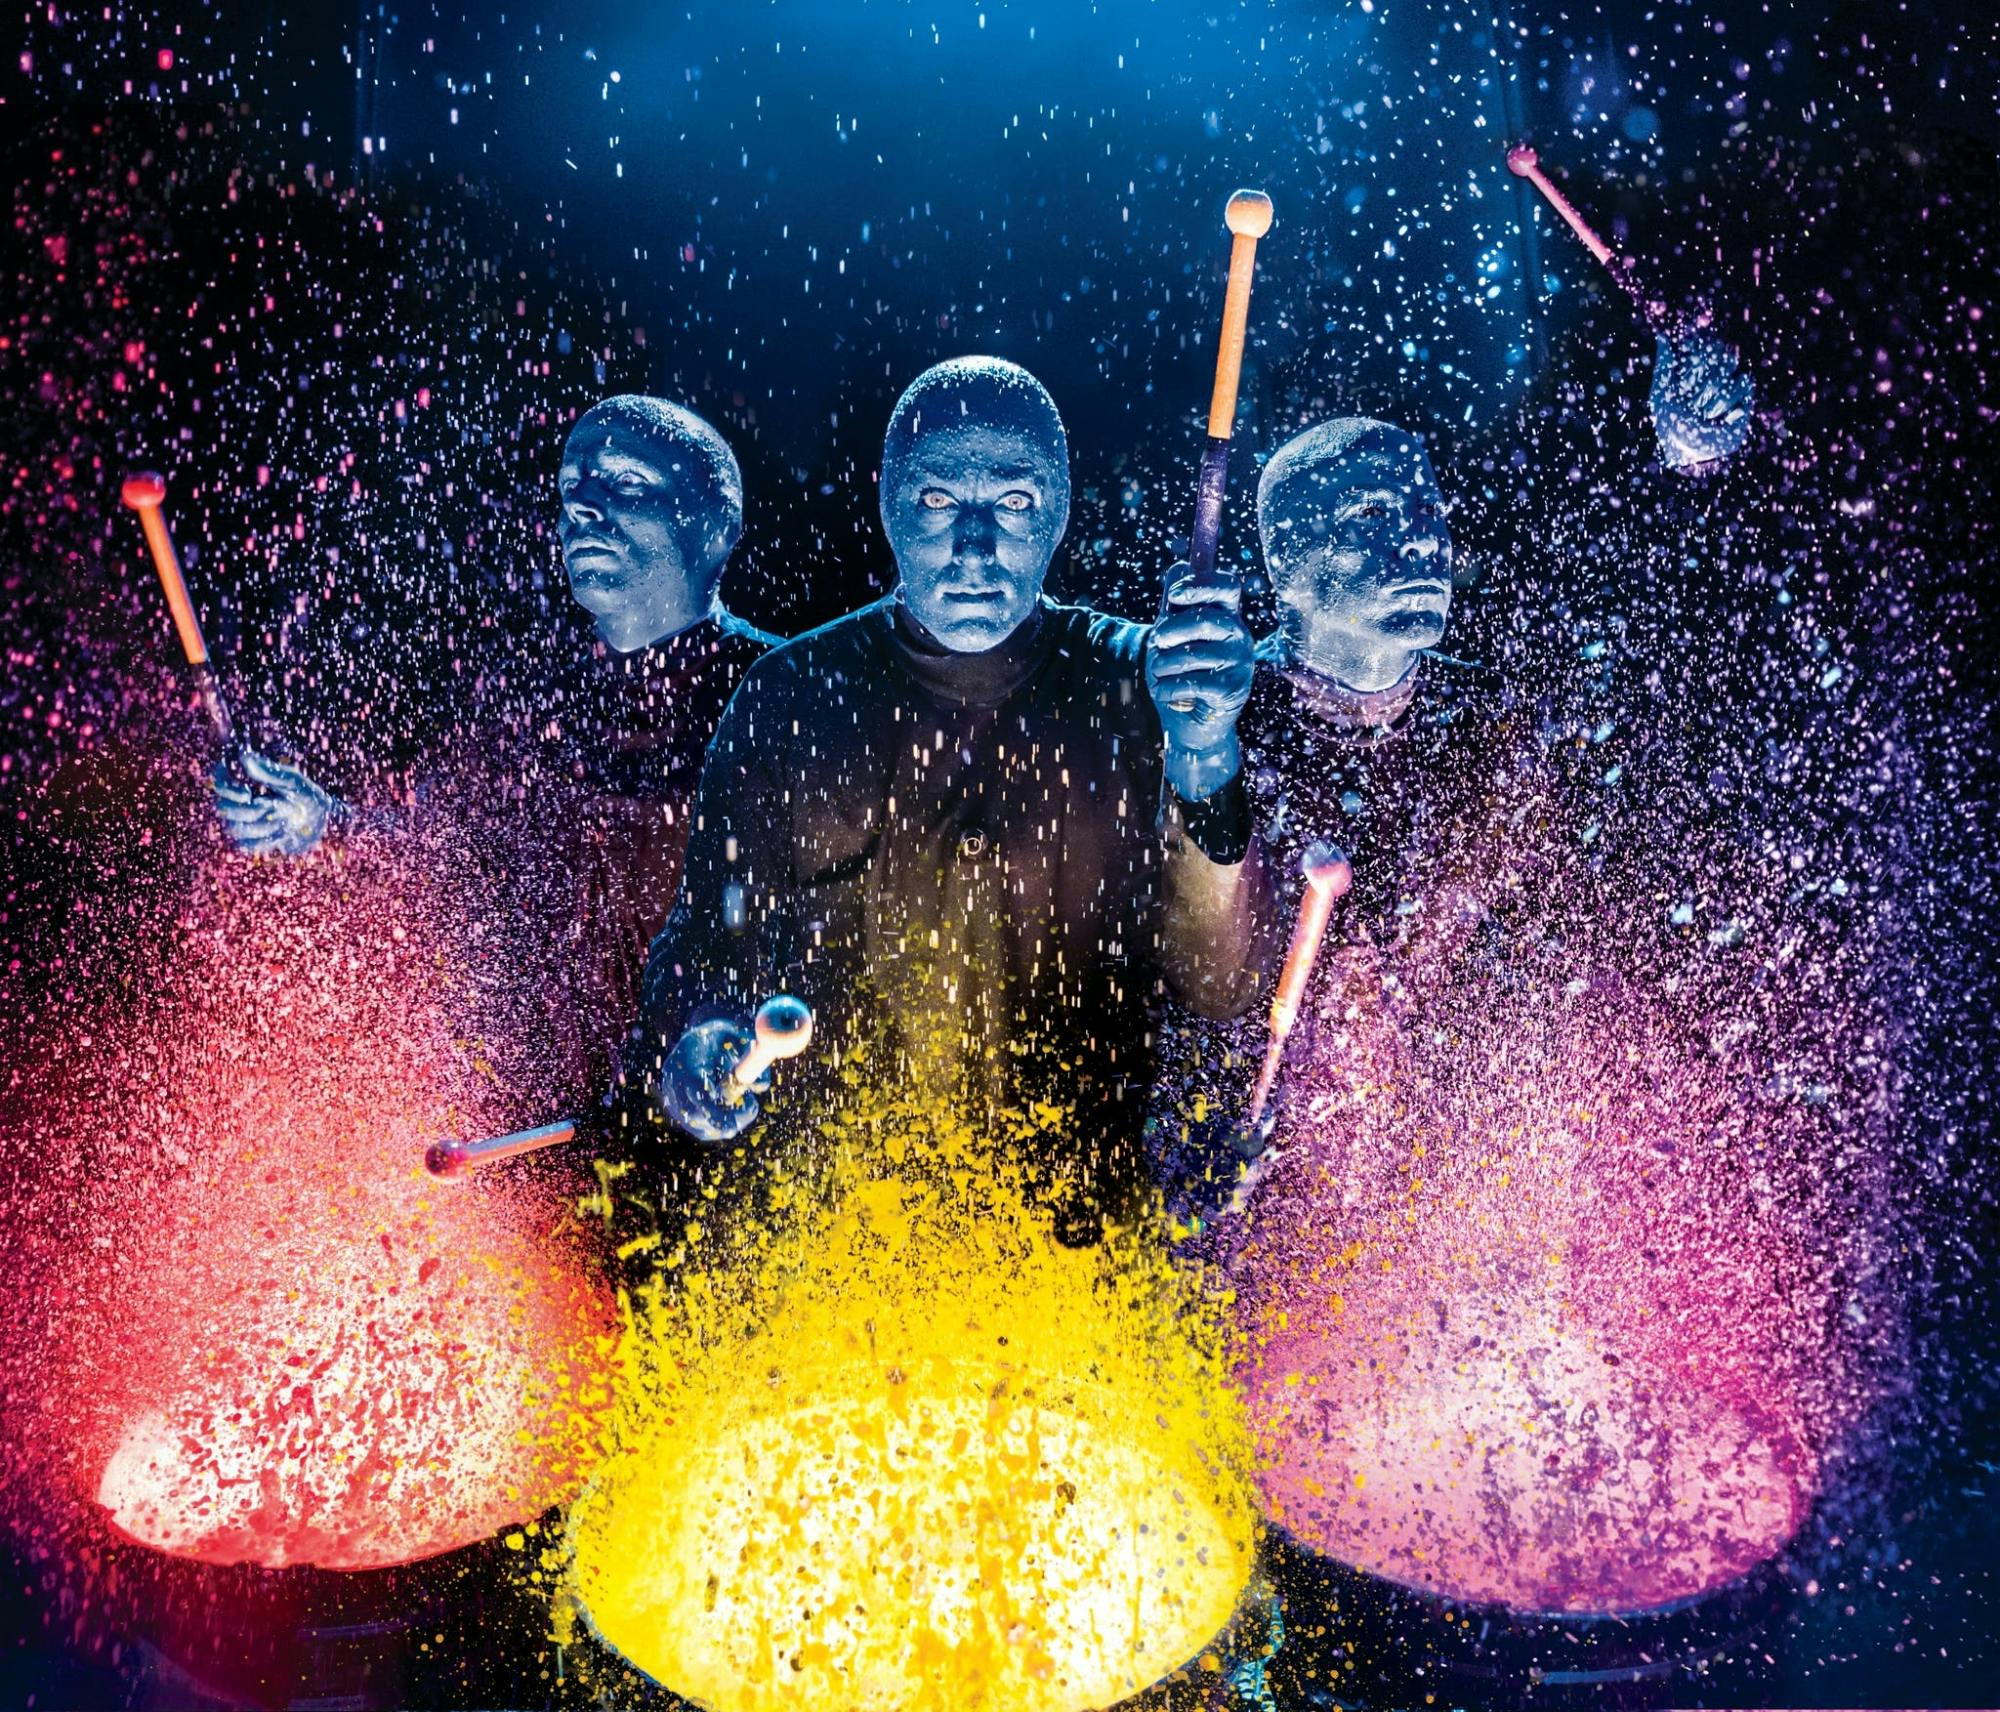 Tickets to Blue Man Group Las Vegas at The Luxor